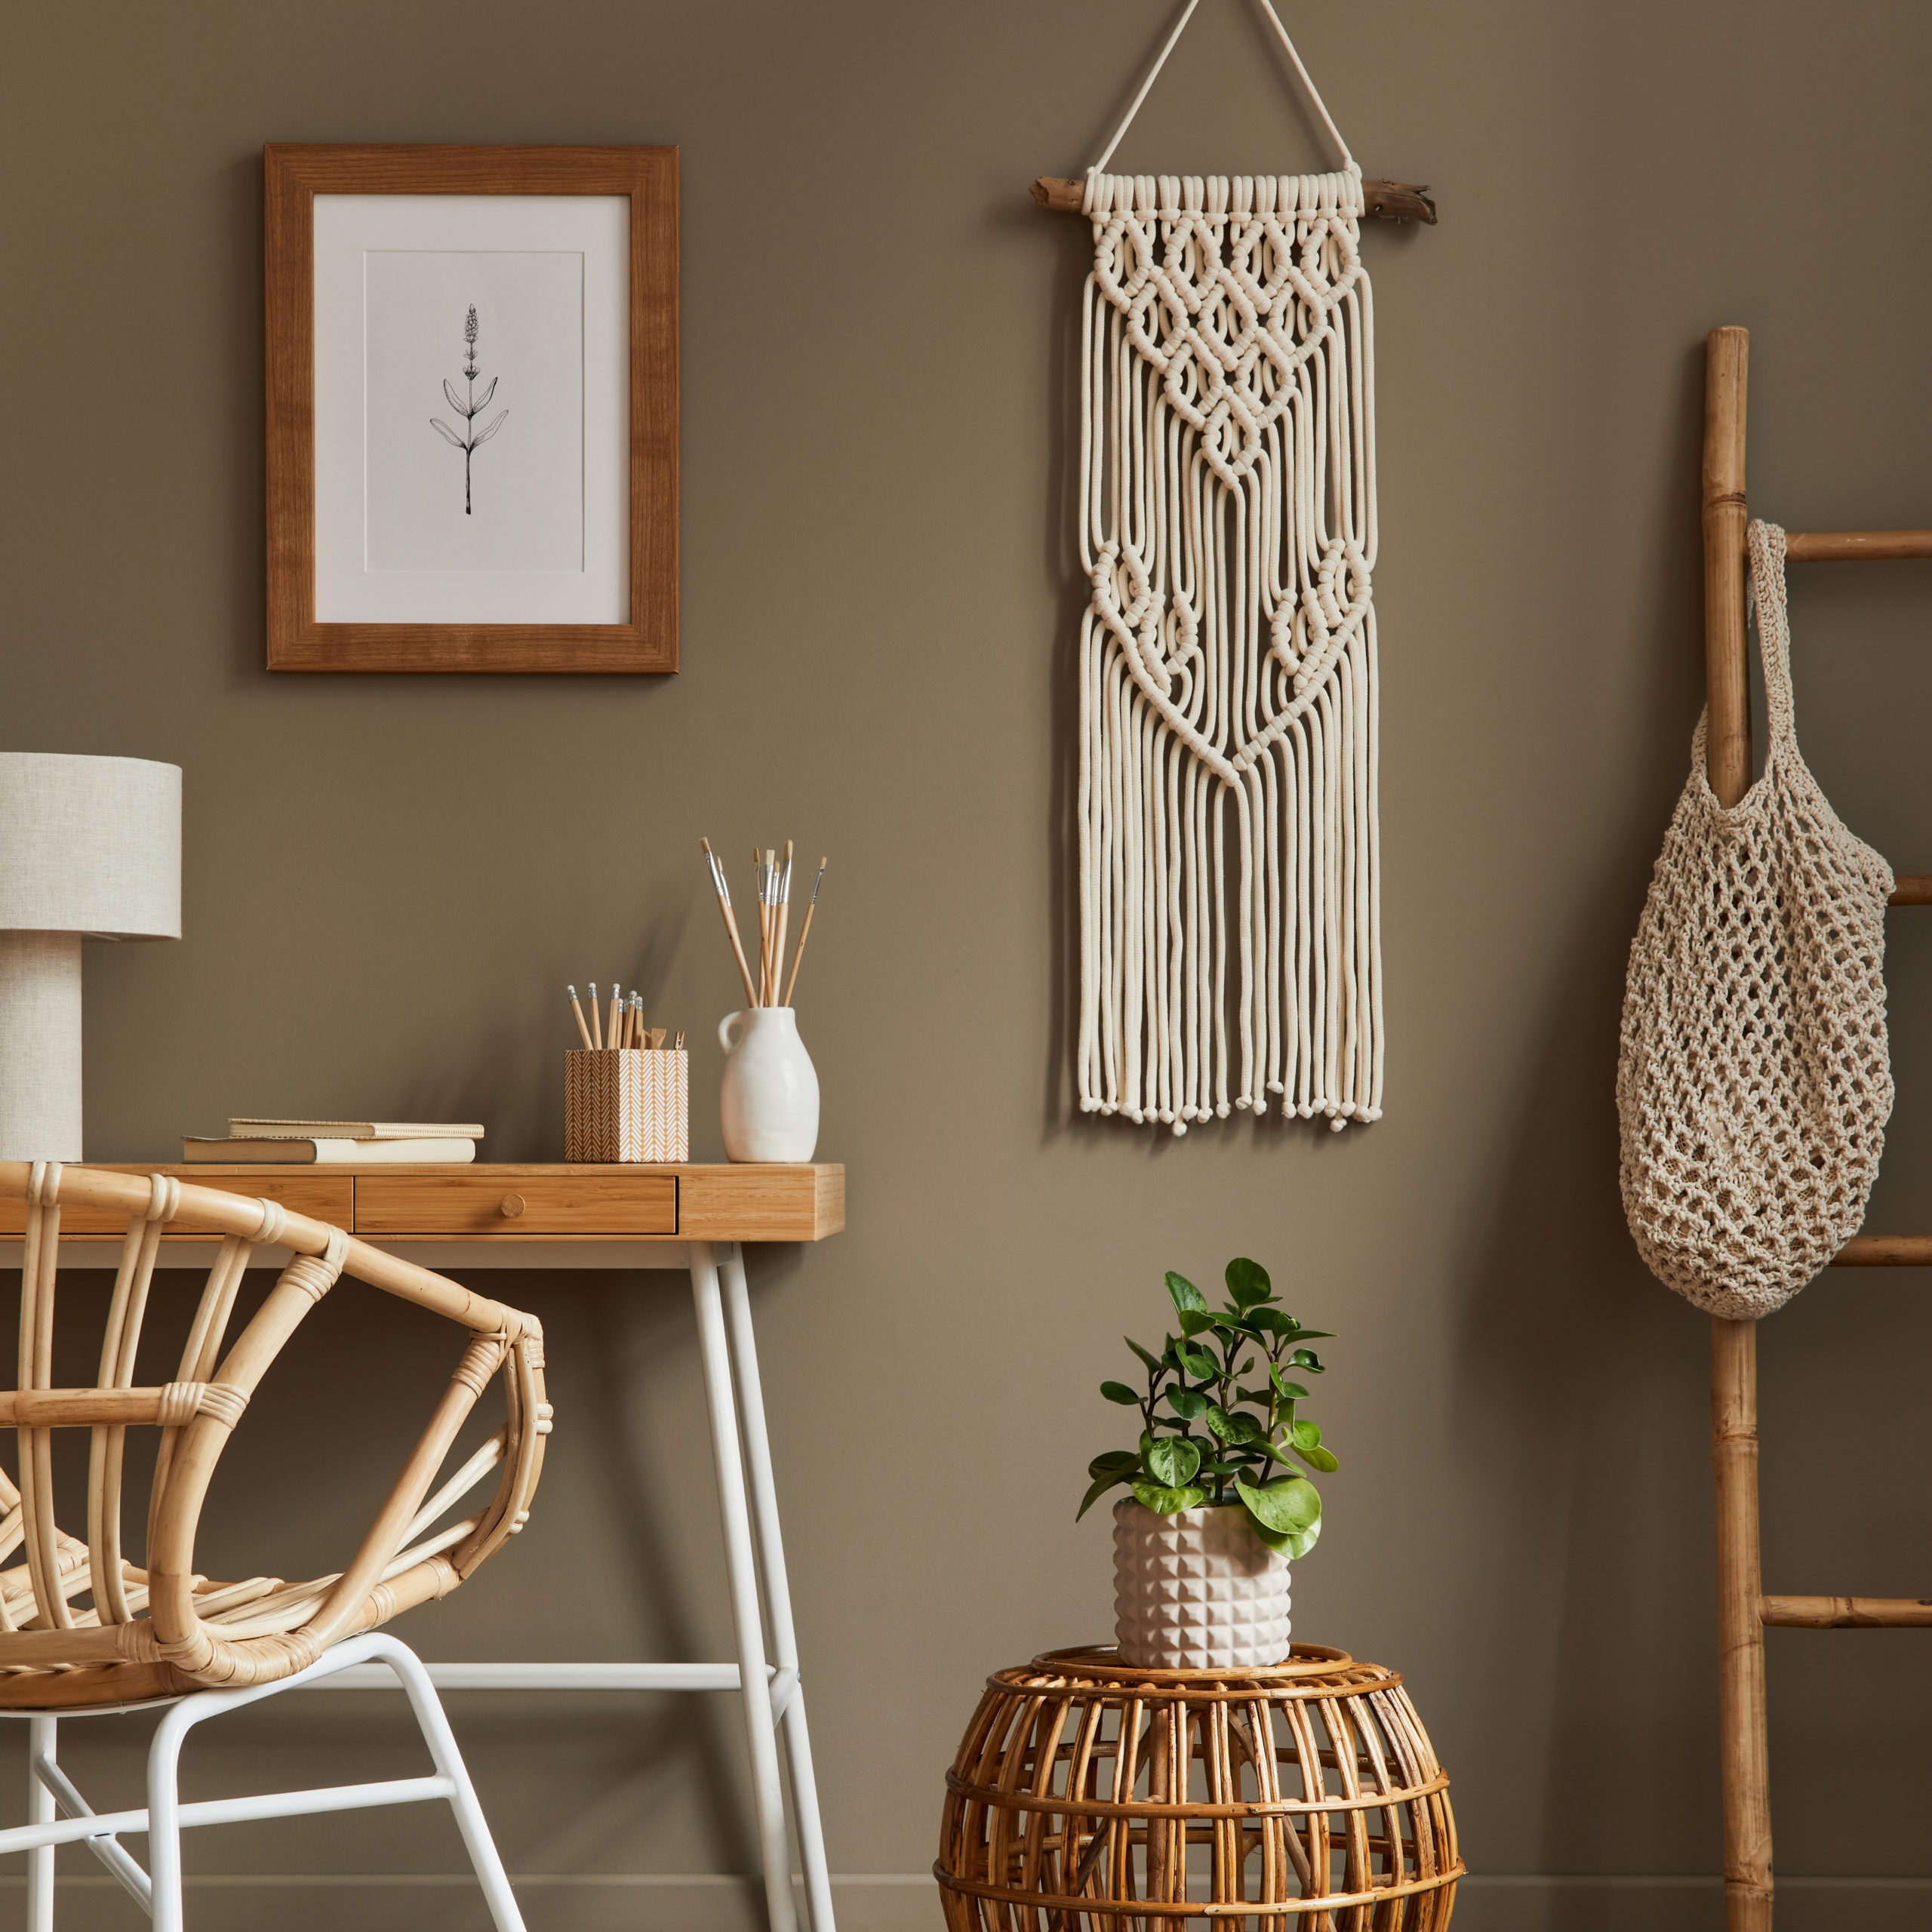 stylish-bohemian-interior-home-office-space-with-wooden-desk-rattan-armchair-brown-mock-up-poster-frame-macrame-office-supplies-lamp-decoration-elegant-personal-accessories-home-decor-scaled